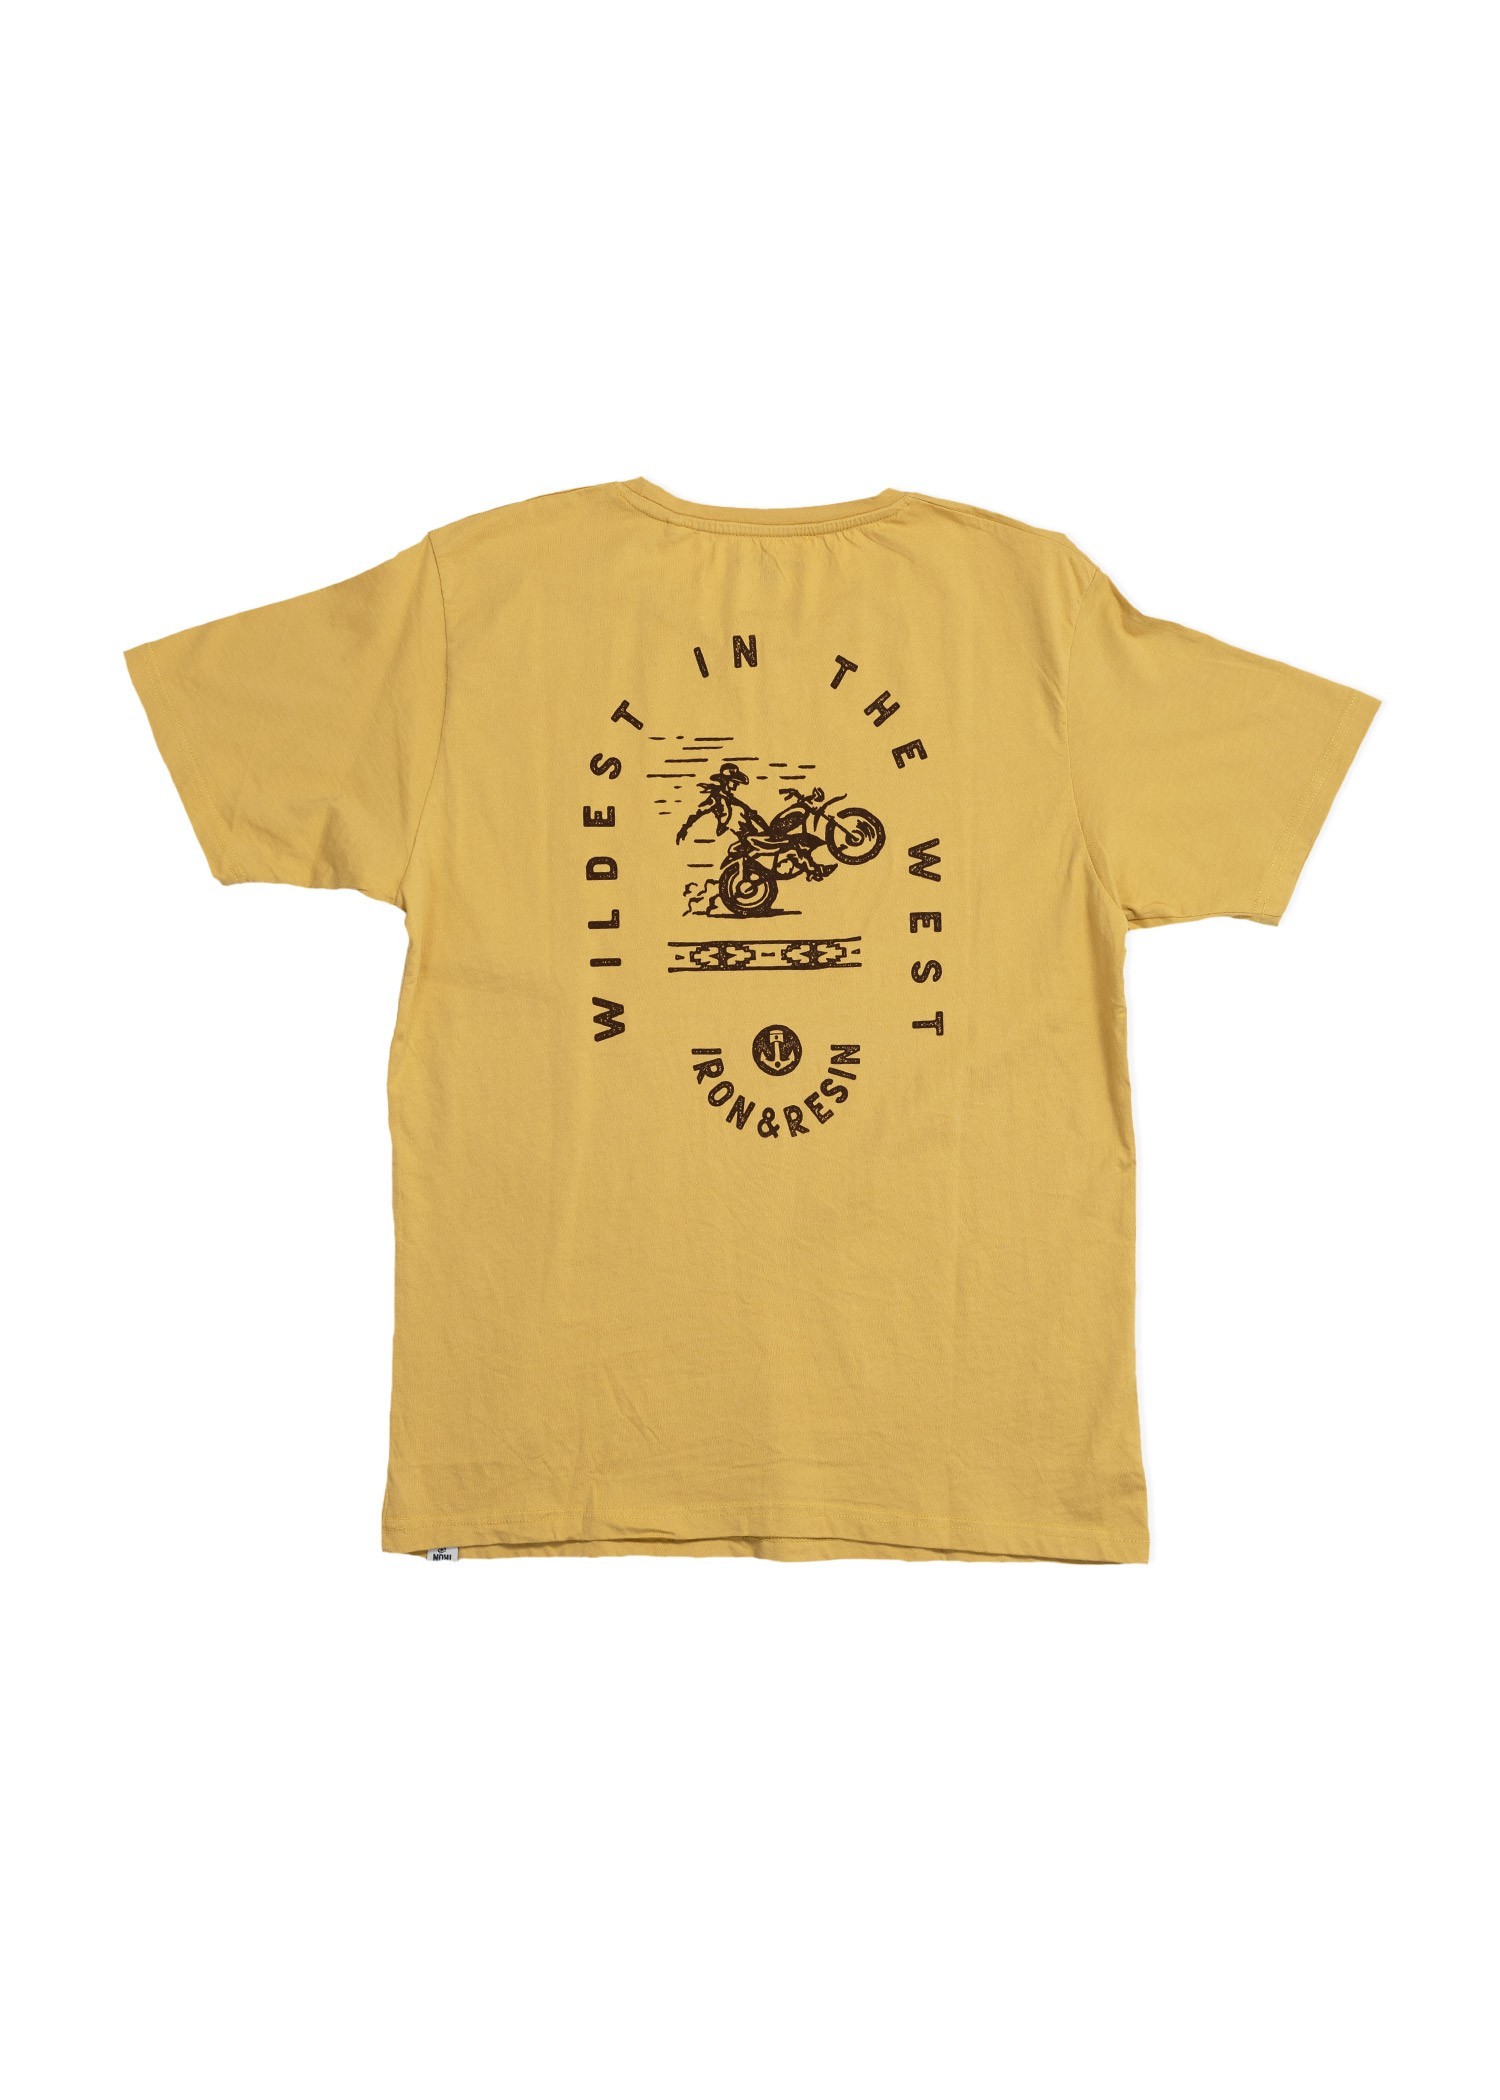 Wildest in the west - T-shirt homme homme - IRON & RESIN